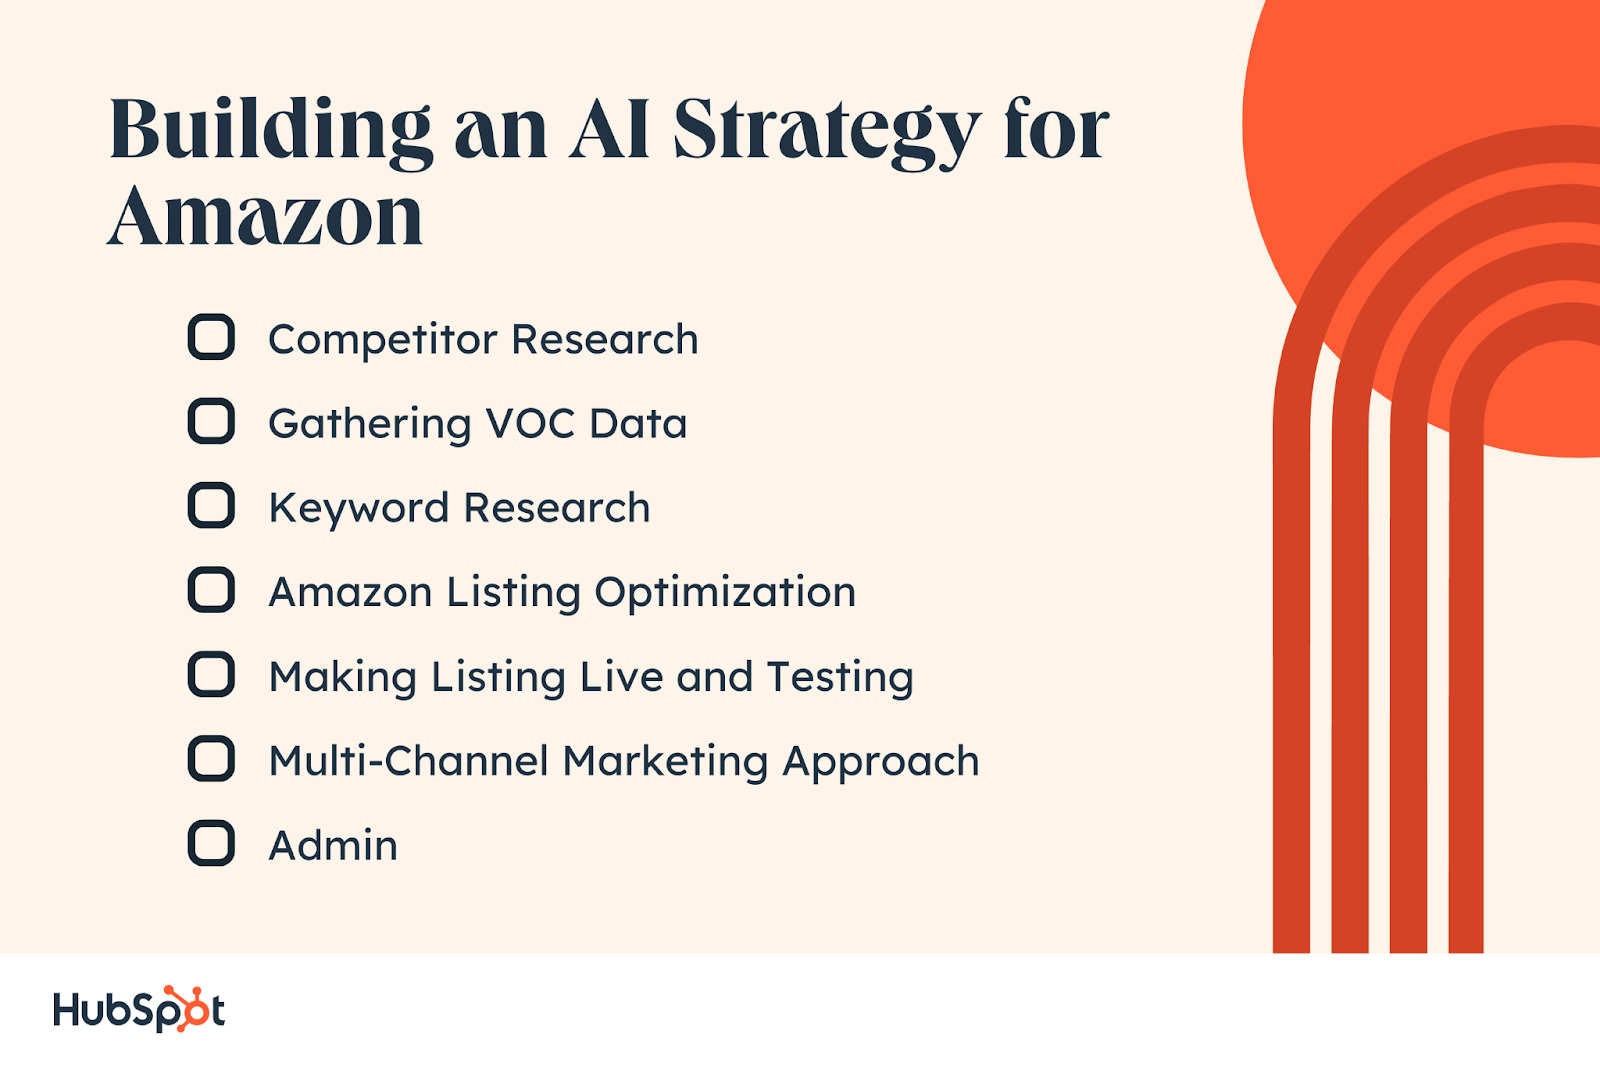 Building an AI Strategy for Amazon. Competitor Research. Gathering VOC Data. Keyword Research. Amazon Listing Optimization. Making Listing Live and Testing. Multi-Channel Marketing Approach. Admin